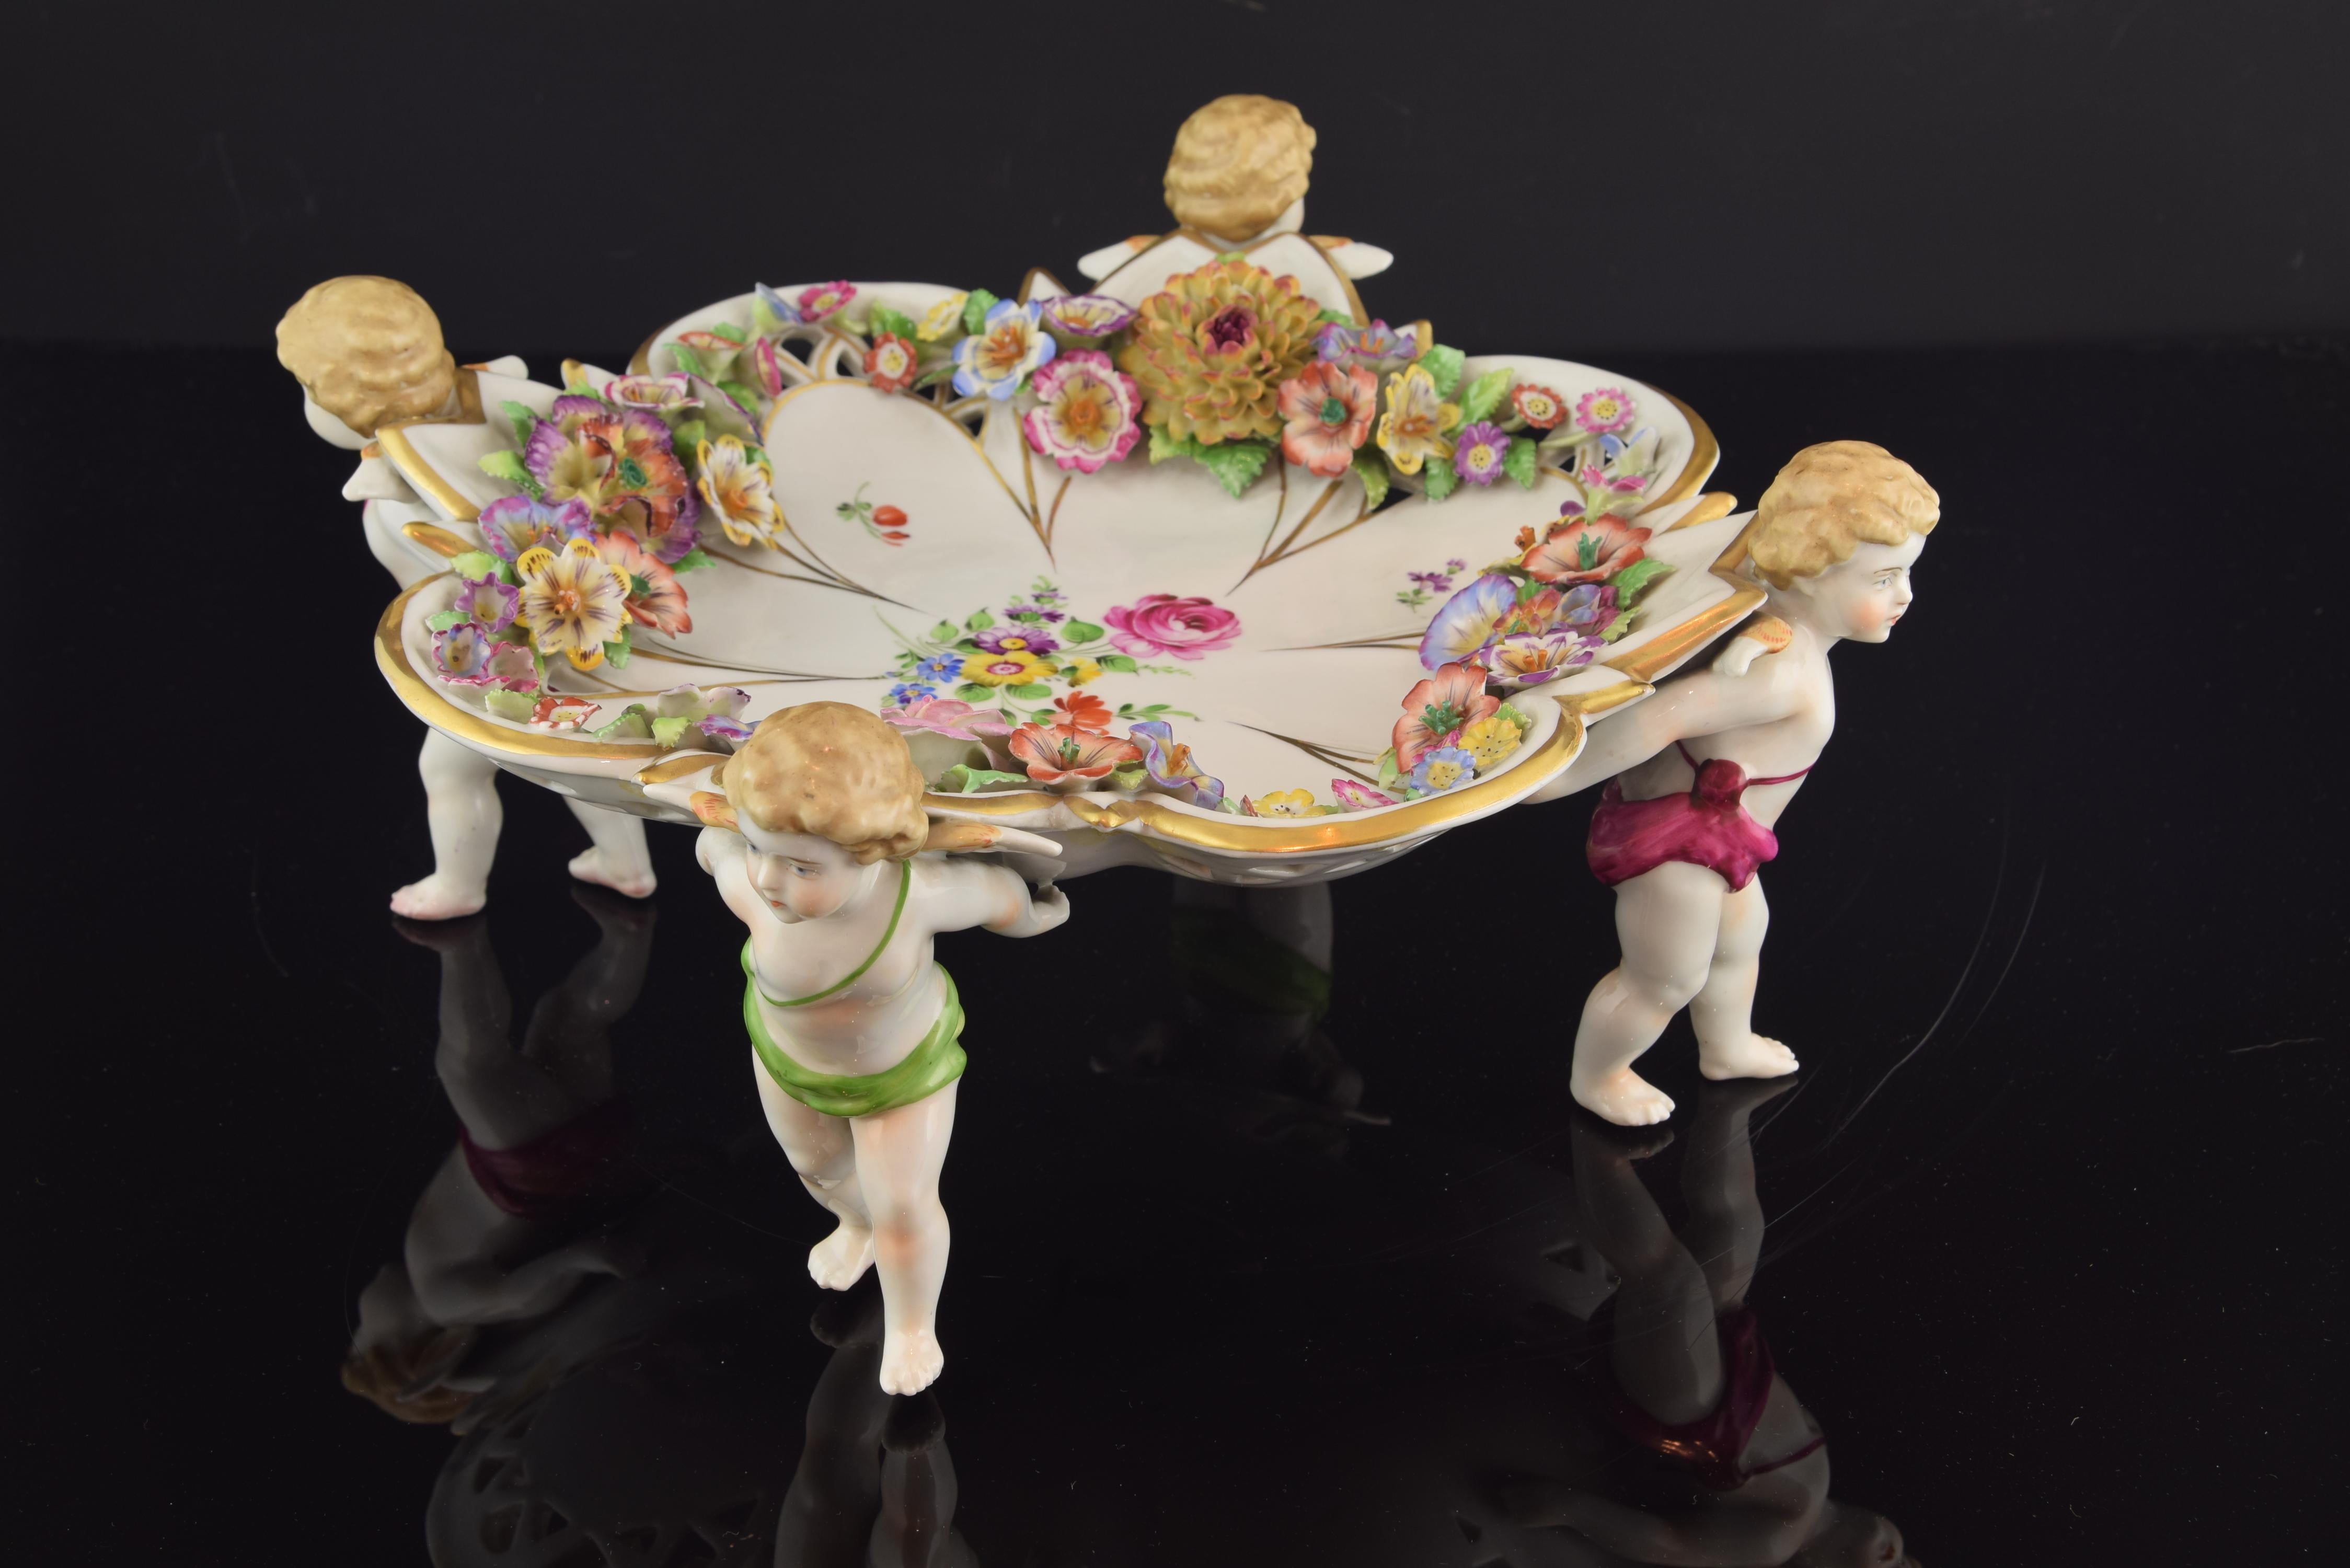 Centerpiece with four little angels or cupids holding on their backs a tray with a golden border and shaped like a flower and that has been enhanced with a multitude of delicate flowers in various shapes and colors. This area also has more flowers